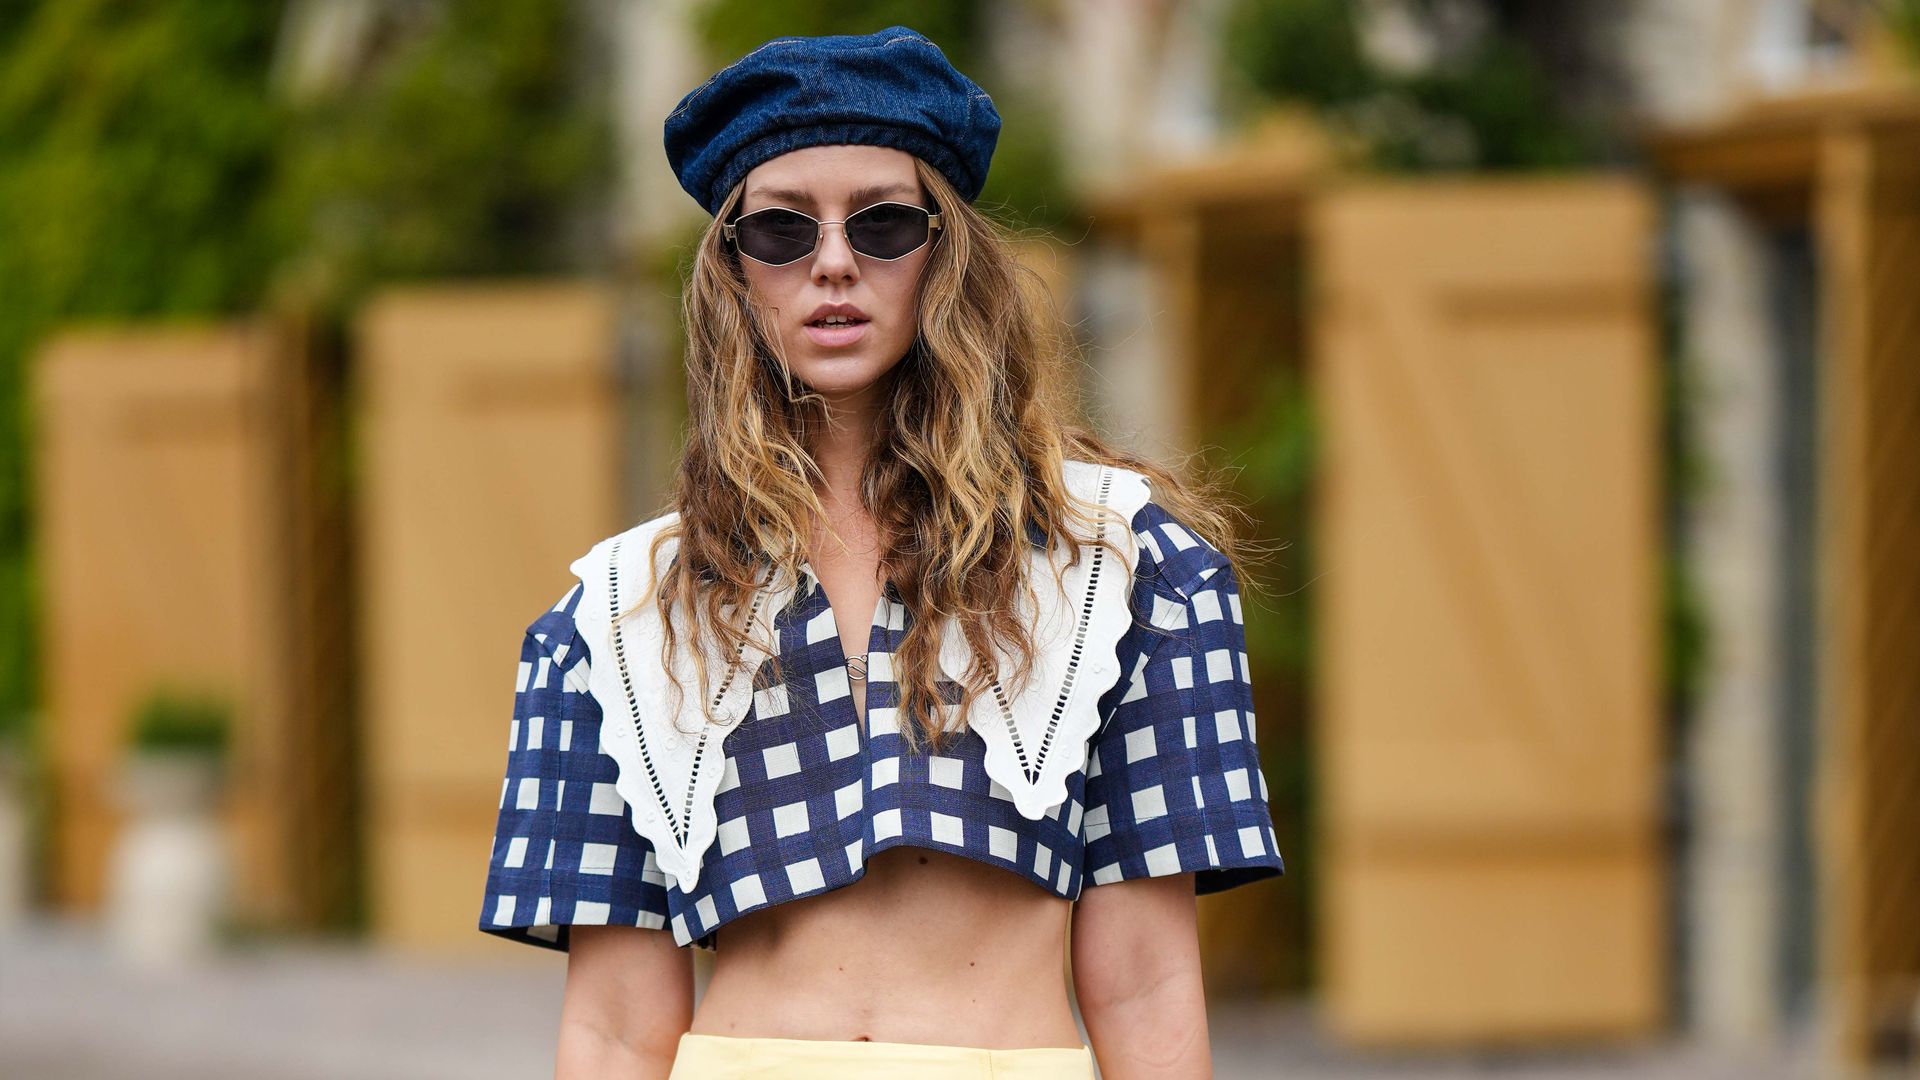 Fashion week guest wearing beret and cropped blouse 